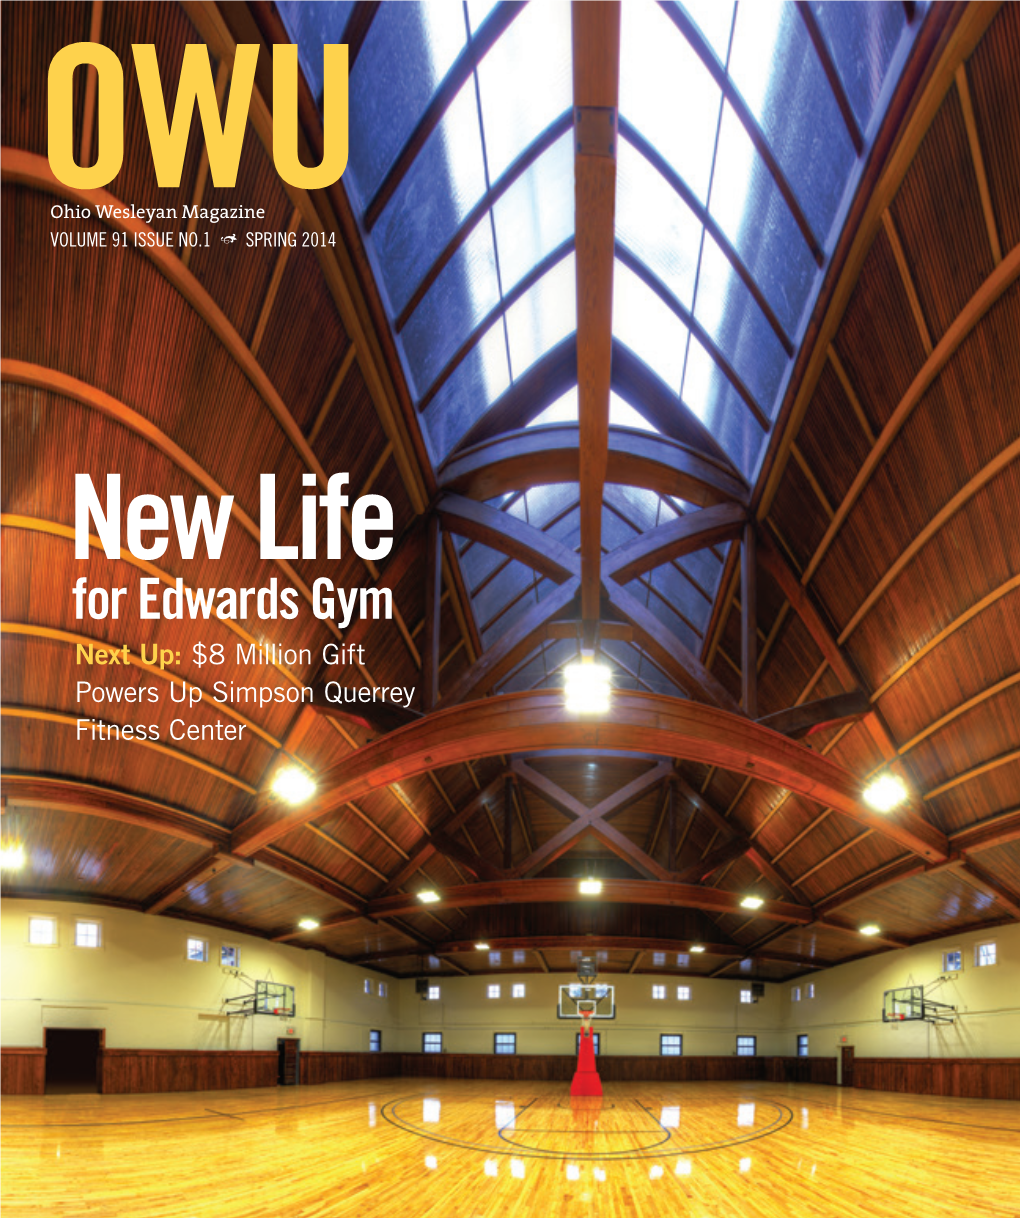 For Edwards Gym Next Up: $8 Million Gift Powers up Simpson Querrey Fitness Center Experience VOLUME 91 ISSUE NO